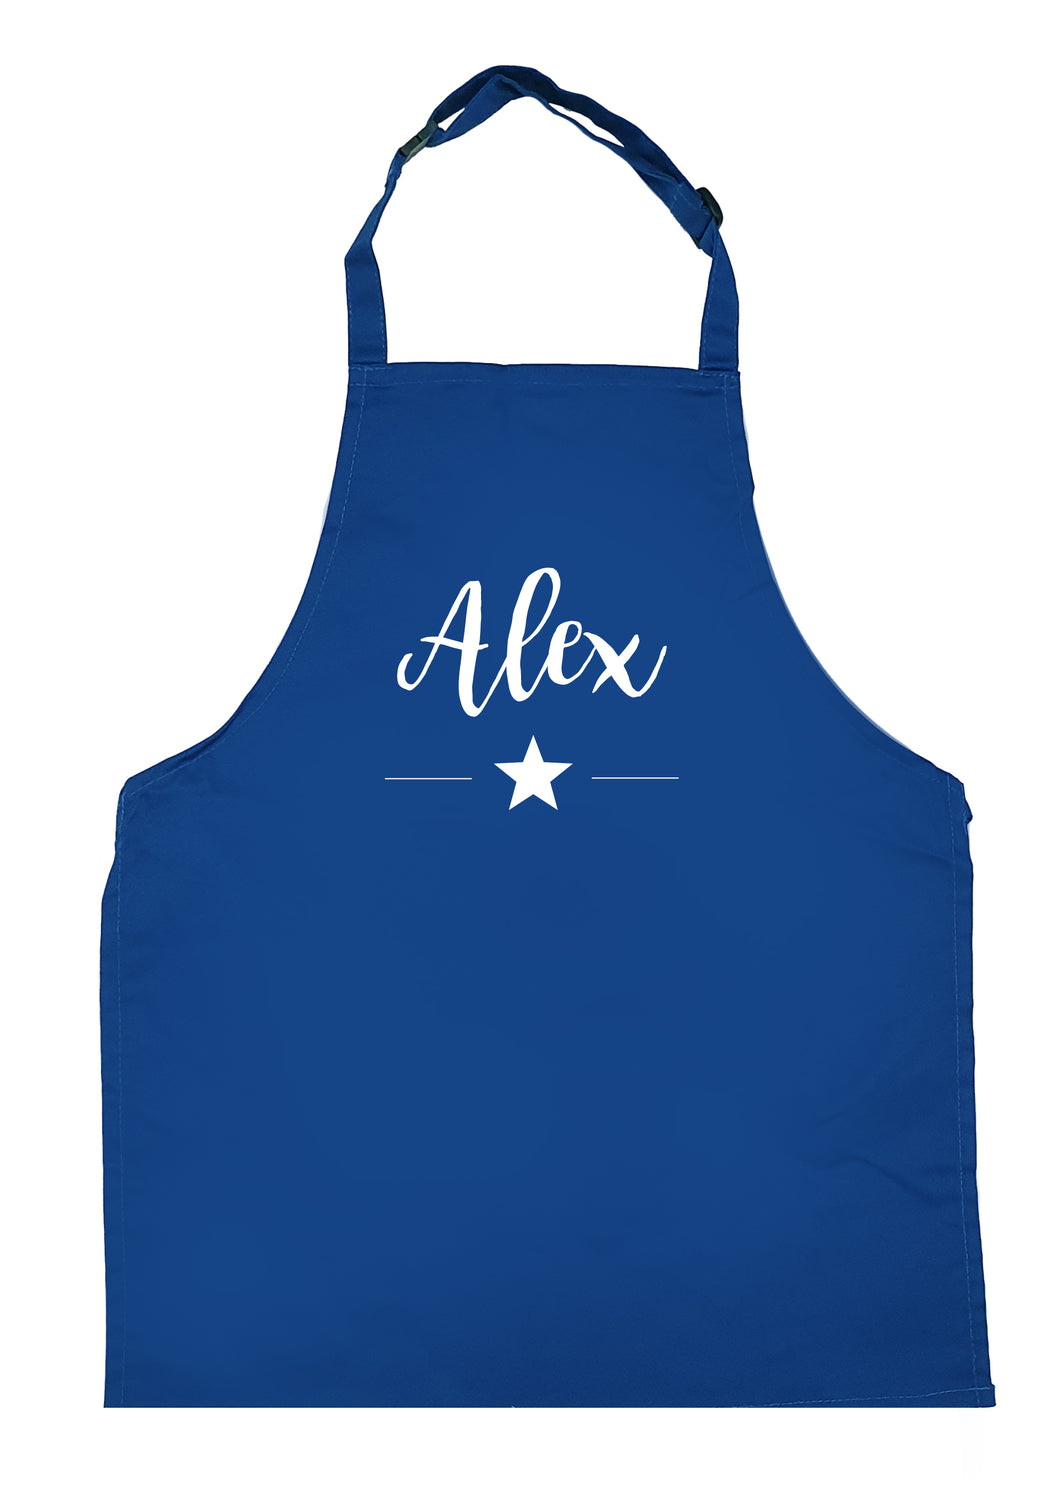 Personalised Childrens Aprons